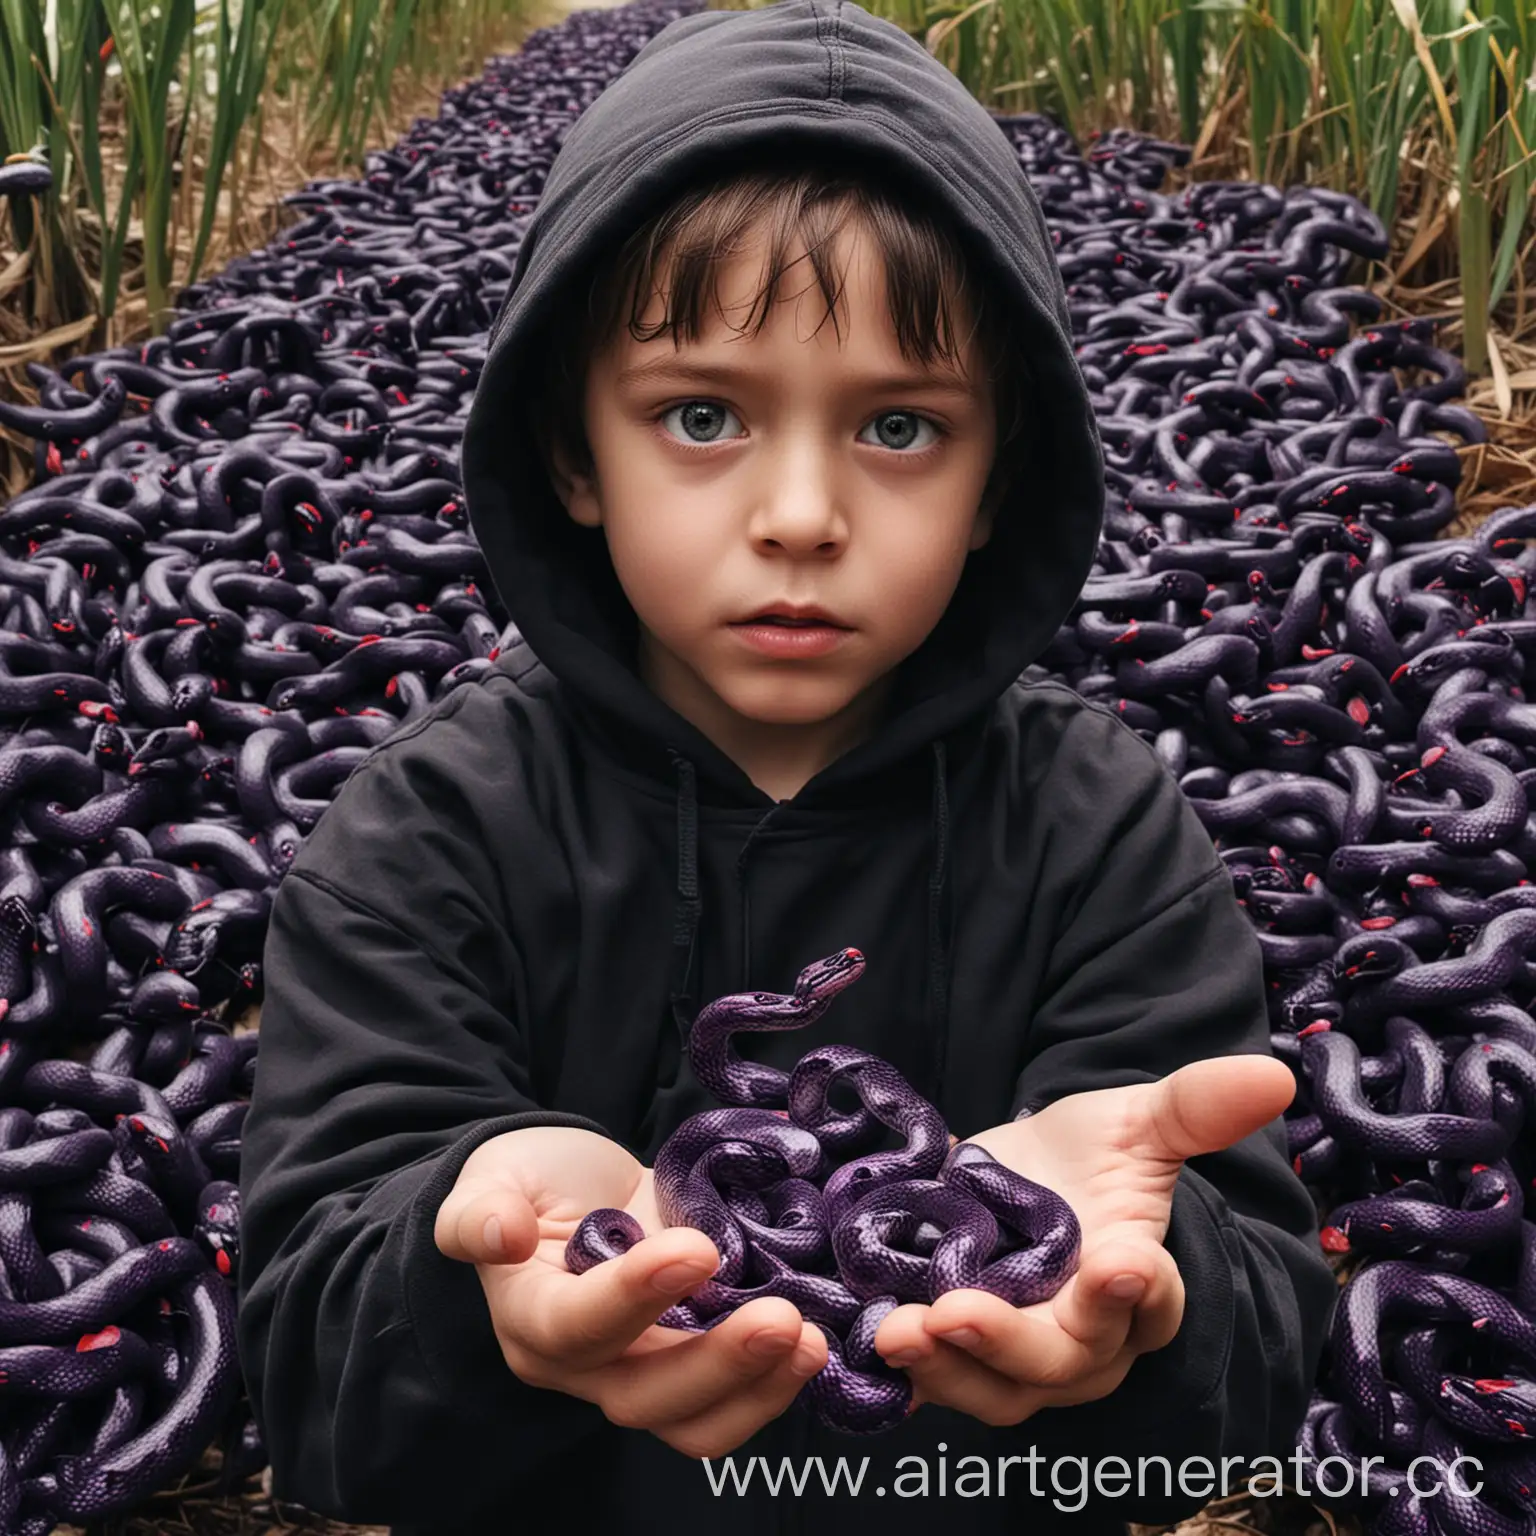 Boy-in-Black-Hoodie-with-Outstretched-Hand-Summoning-Purple-Snakes